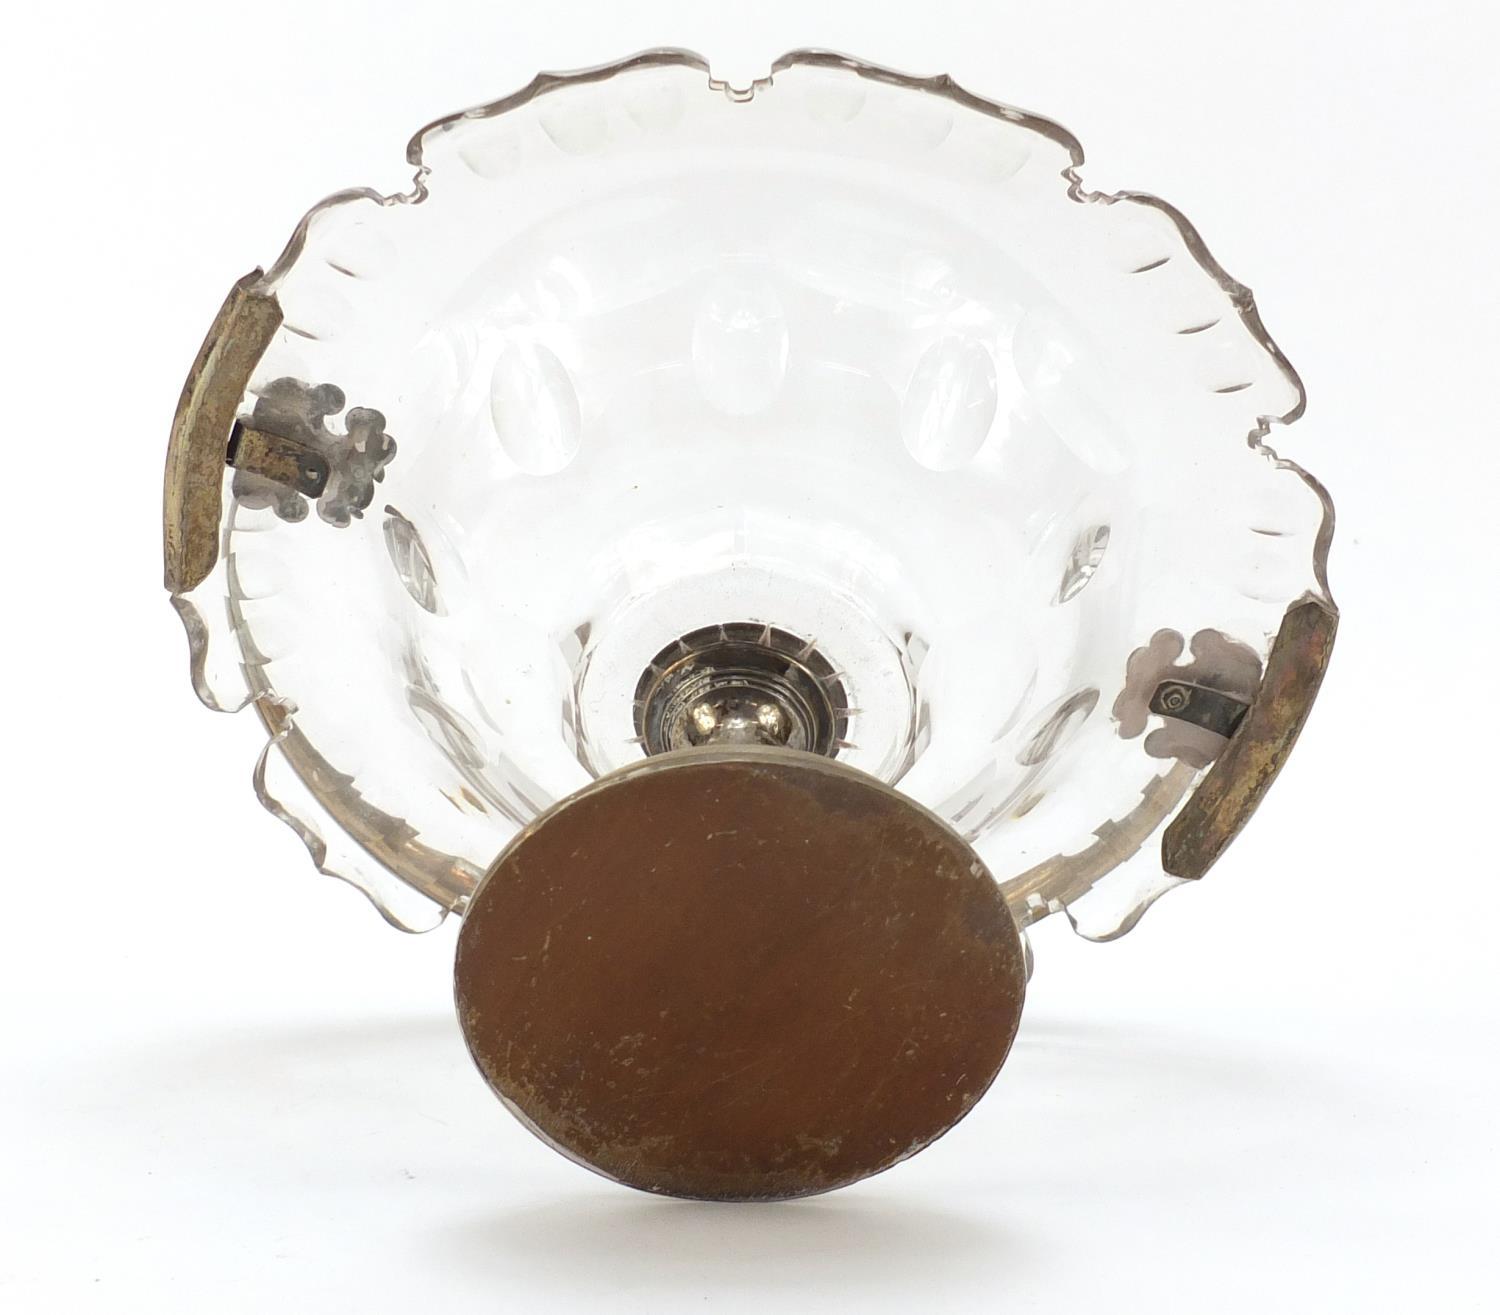 19th century French cut glass baskey with silver swing handle and pedestal, 28cm in diameter : For - Image 7 of 8